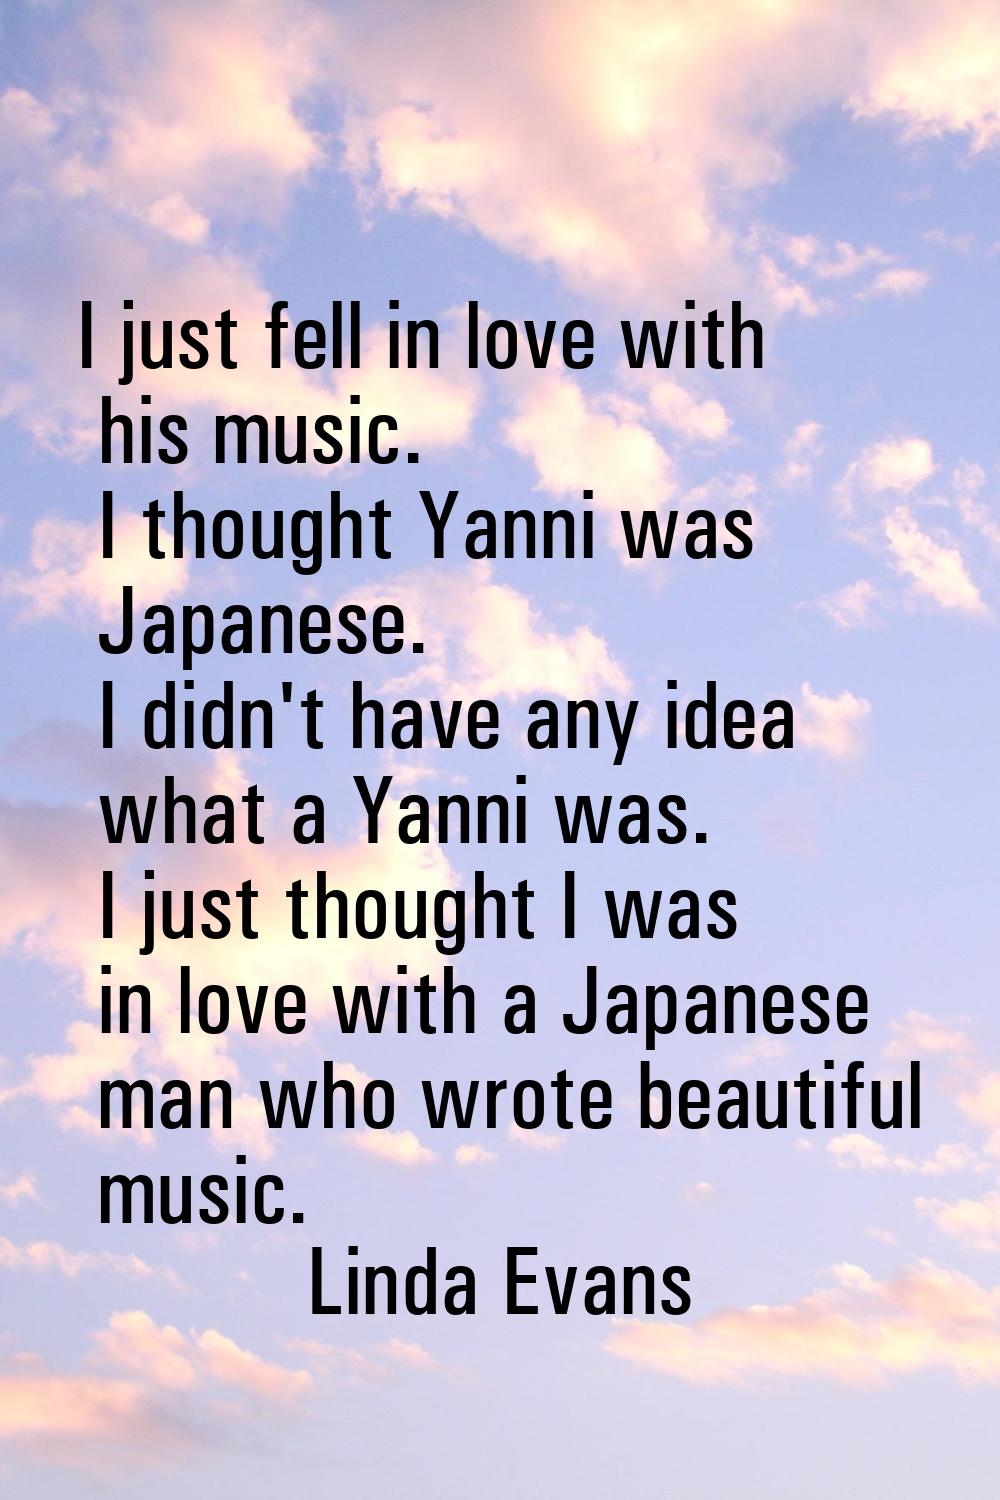 I just fell in love with his music. I thought Yanni was Japanese. I didn't have any idea what a Yan